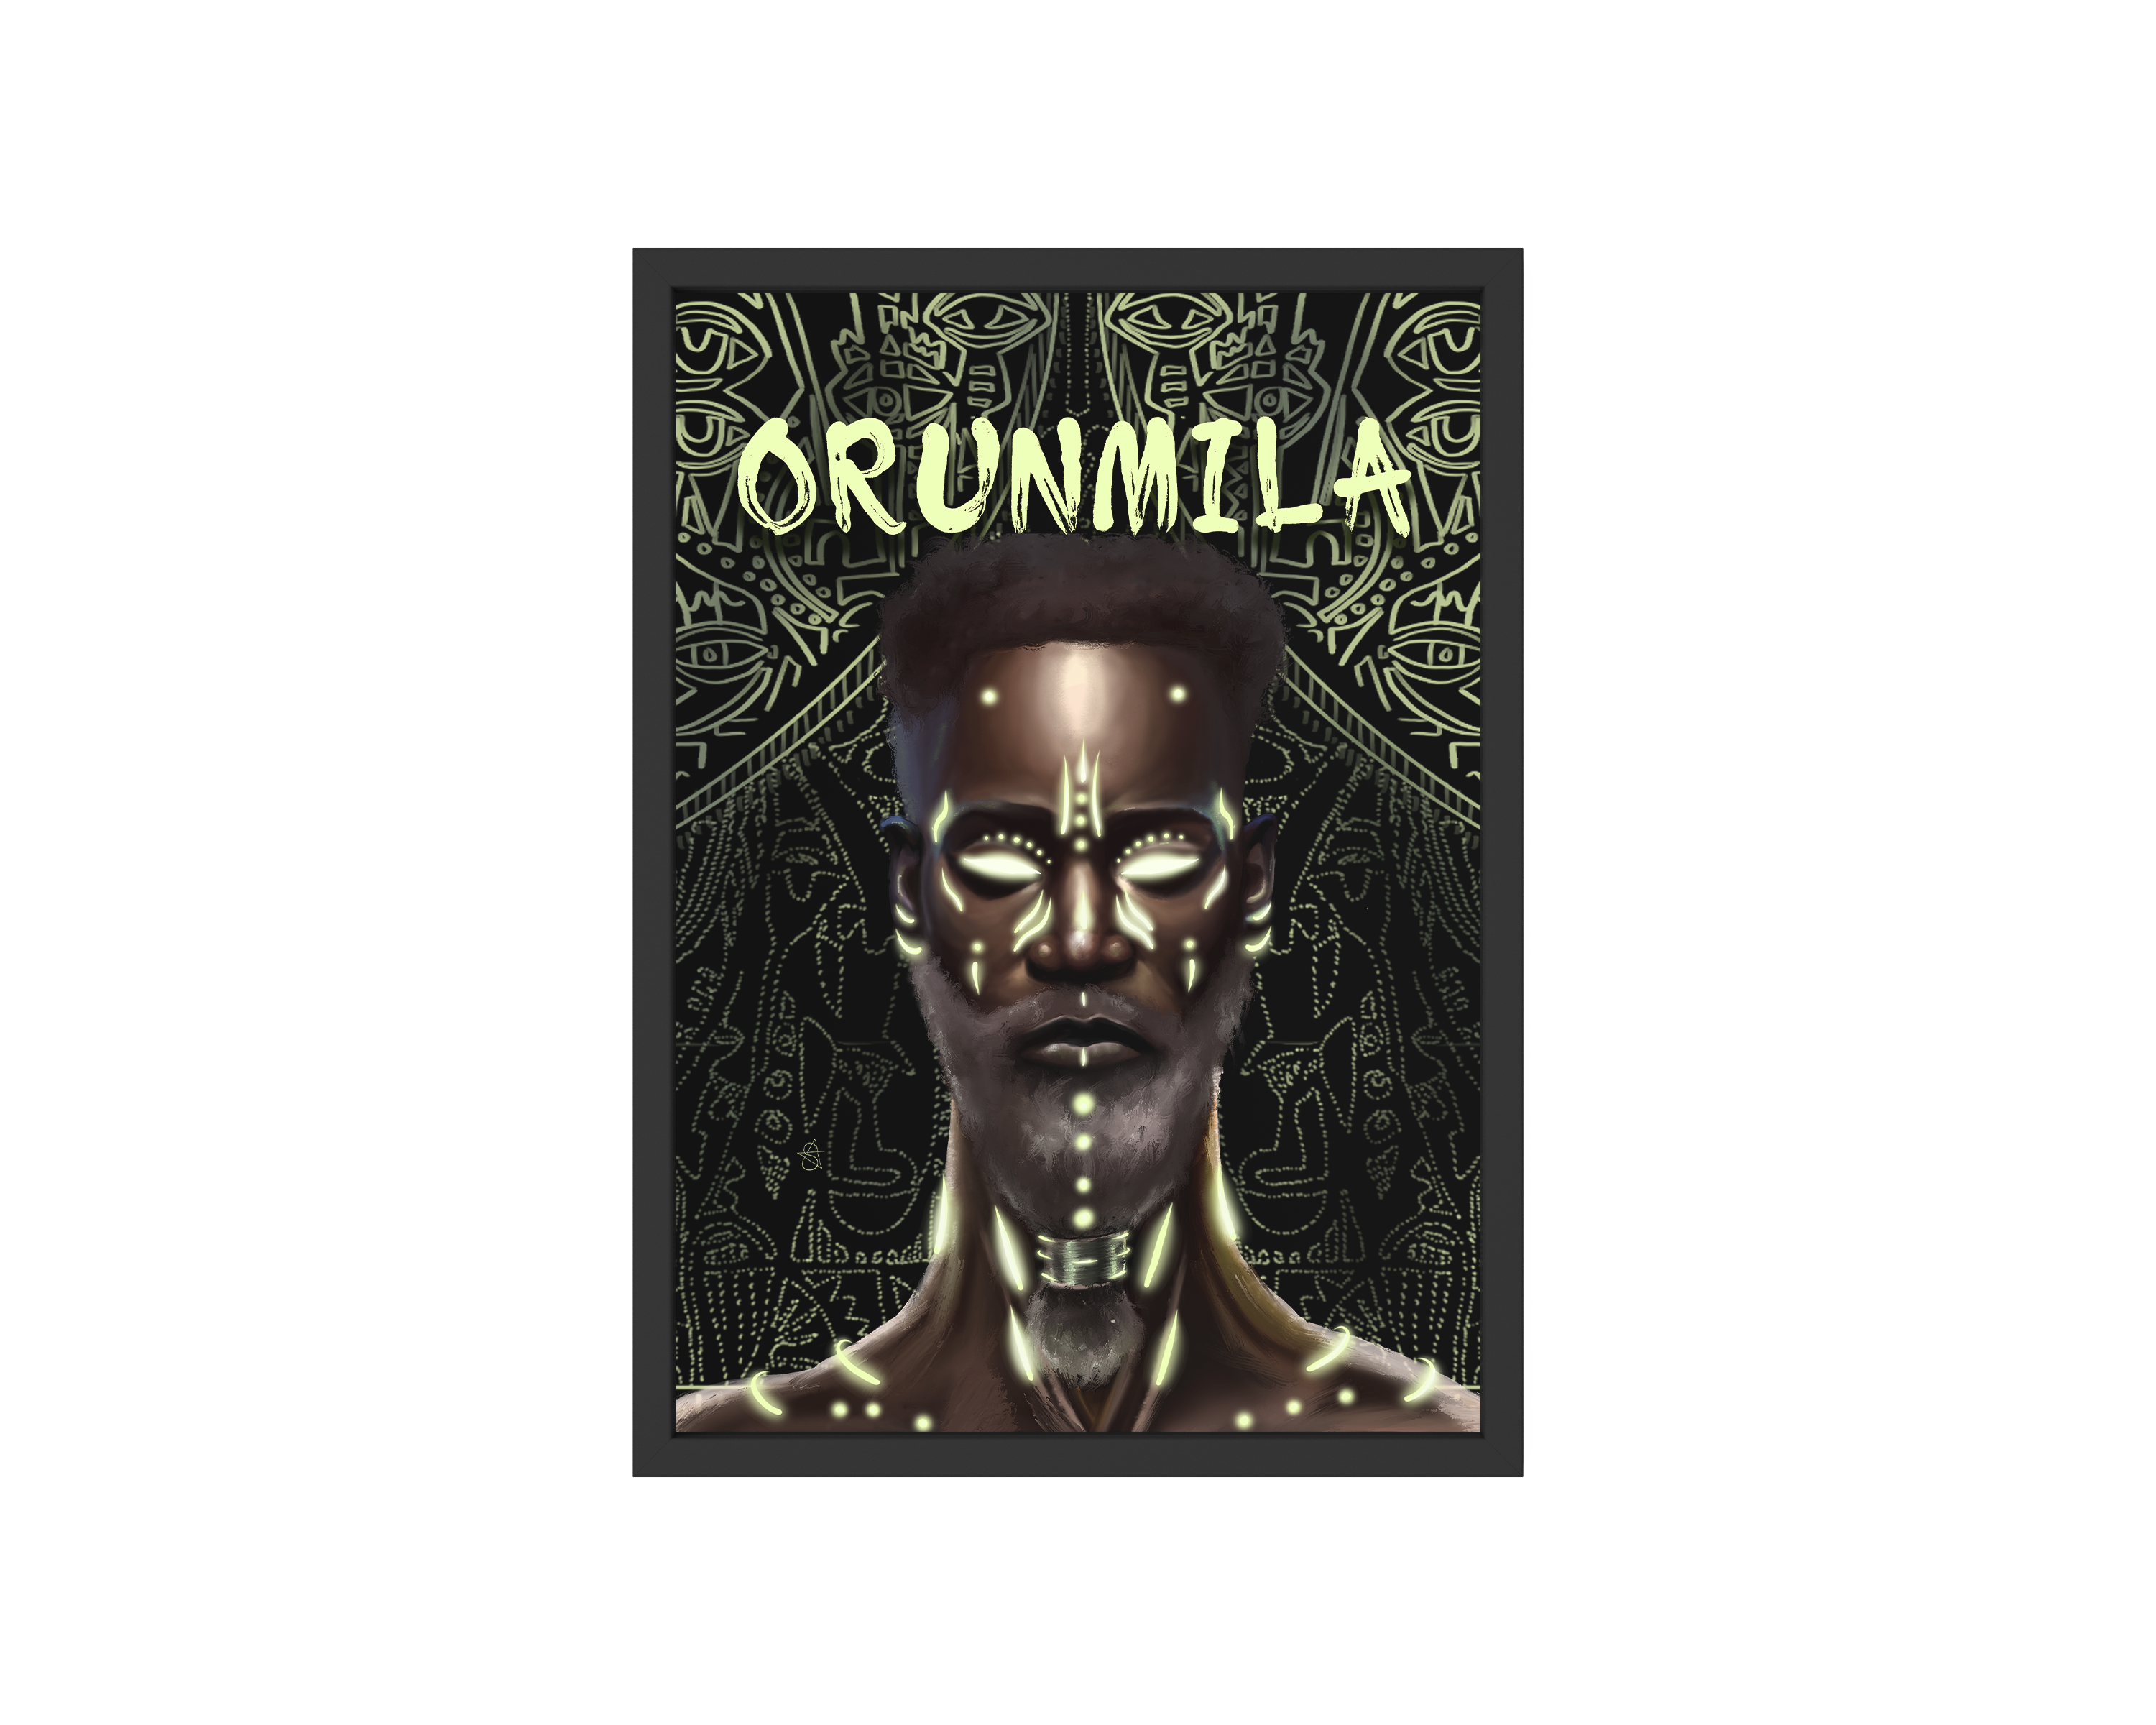 Orunmila Holographic Art Print on high-quality matte or velvet paper, framed in gallery black, white, or natural maple, depicting Yoruba Orisa who is a master diviner and healer.